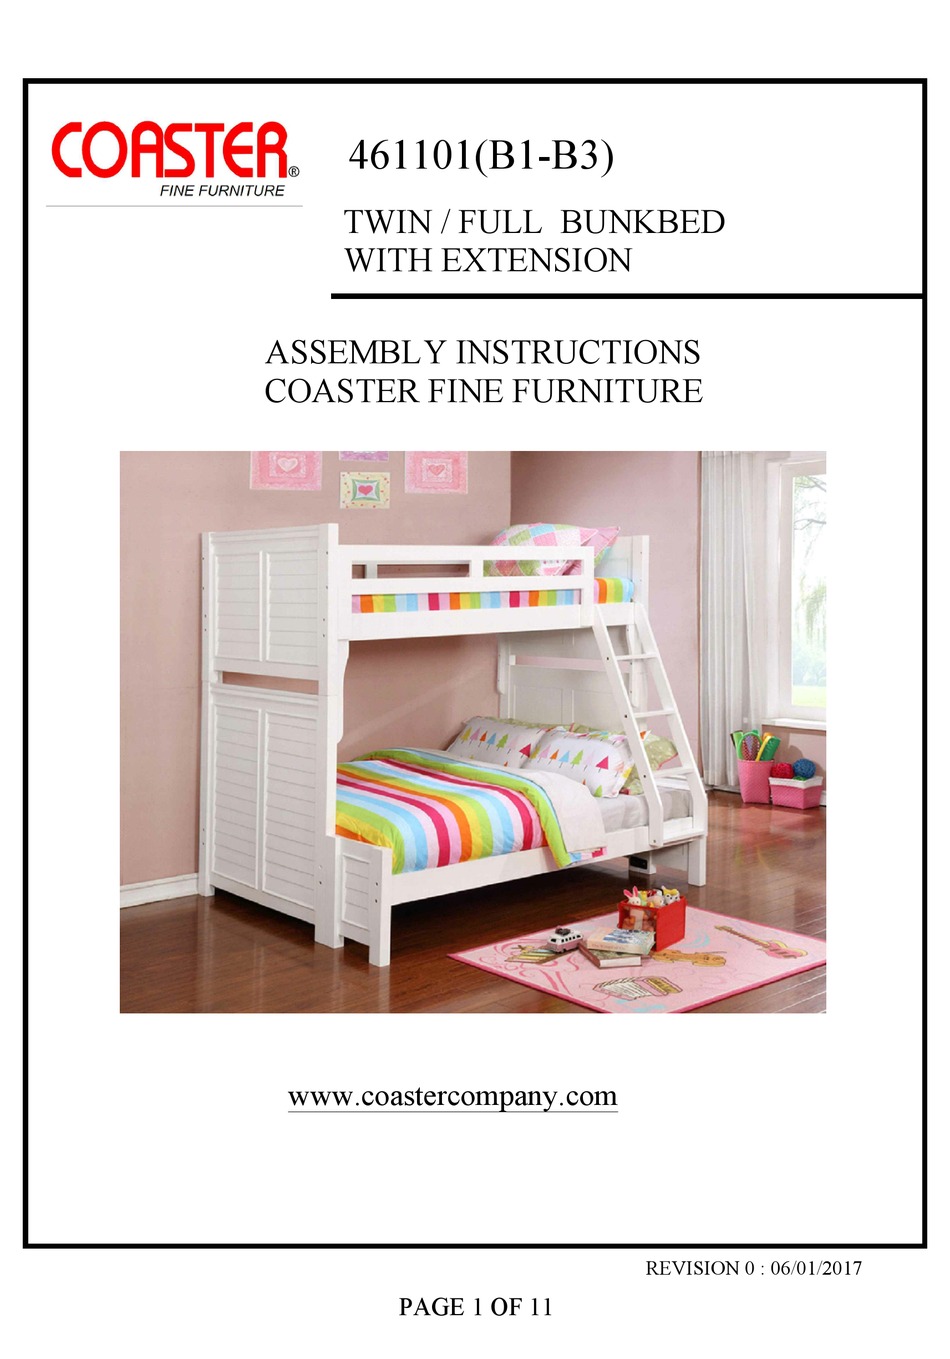 Coaster Fine Furniture 461101 Assembly, Coaster Fine Furniture Bunk Bed Assembly Instructions